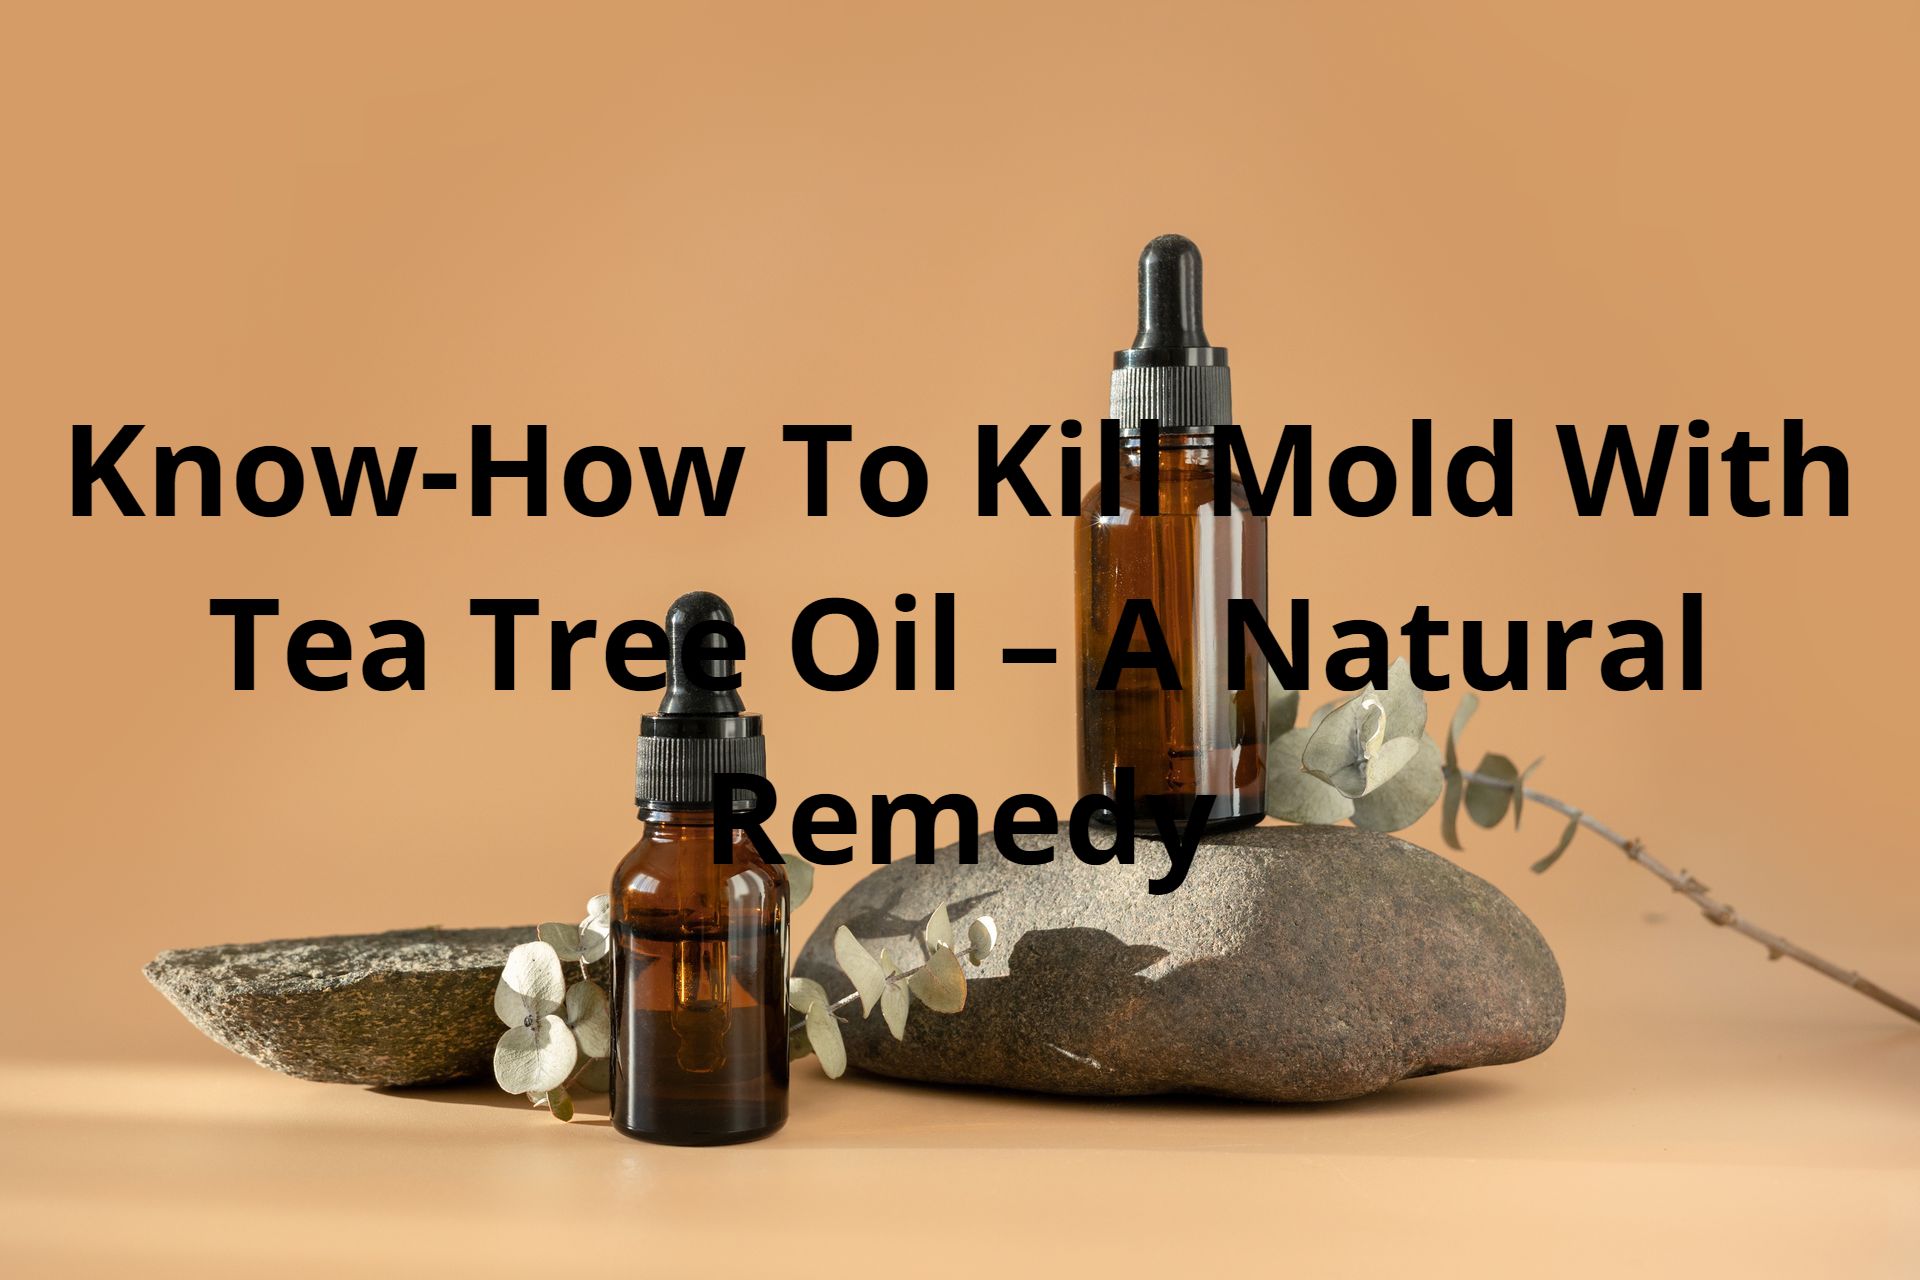 Know-How To Kill Mold With Tea Tree Oil – A Natural Remedy